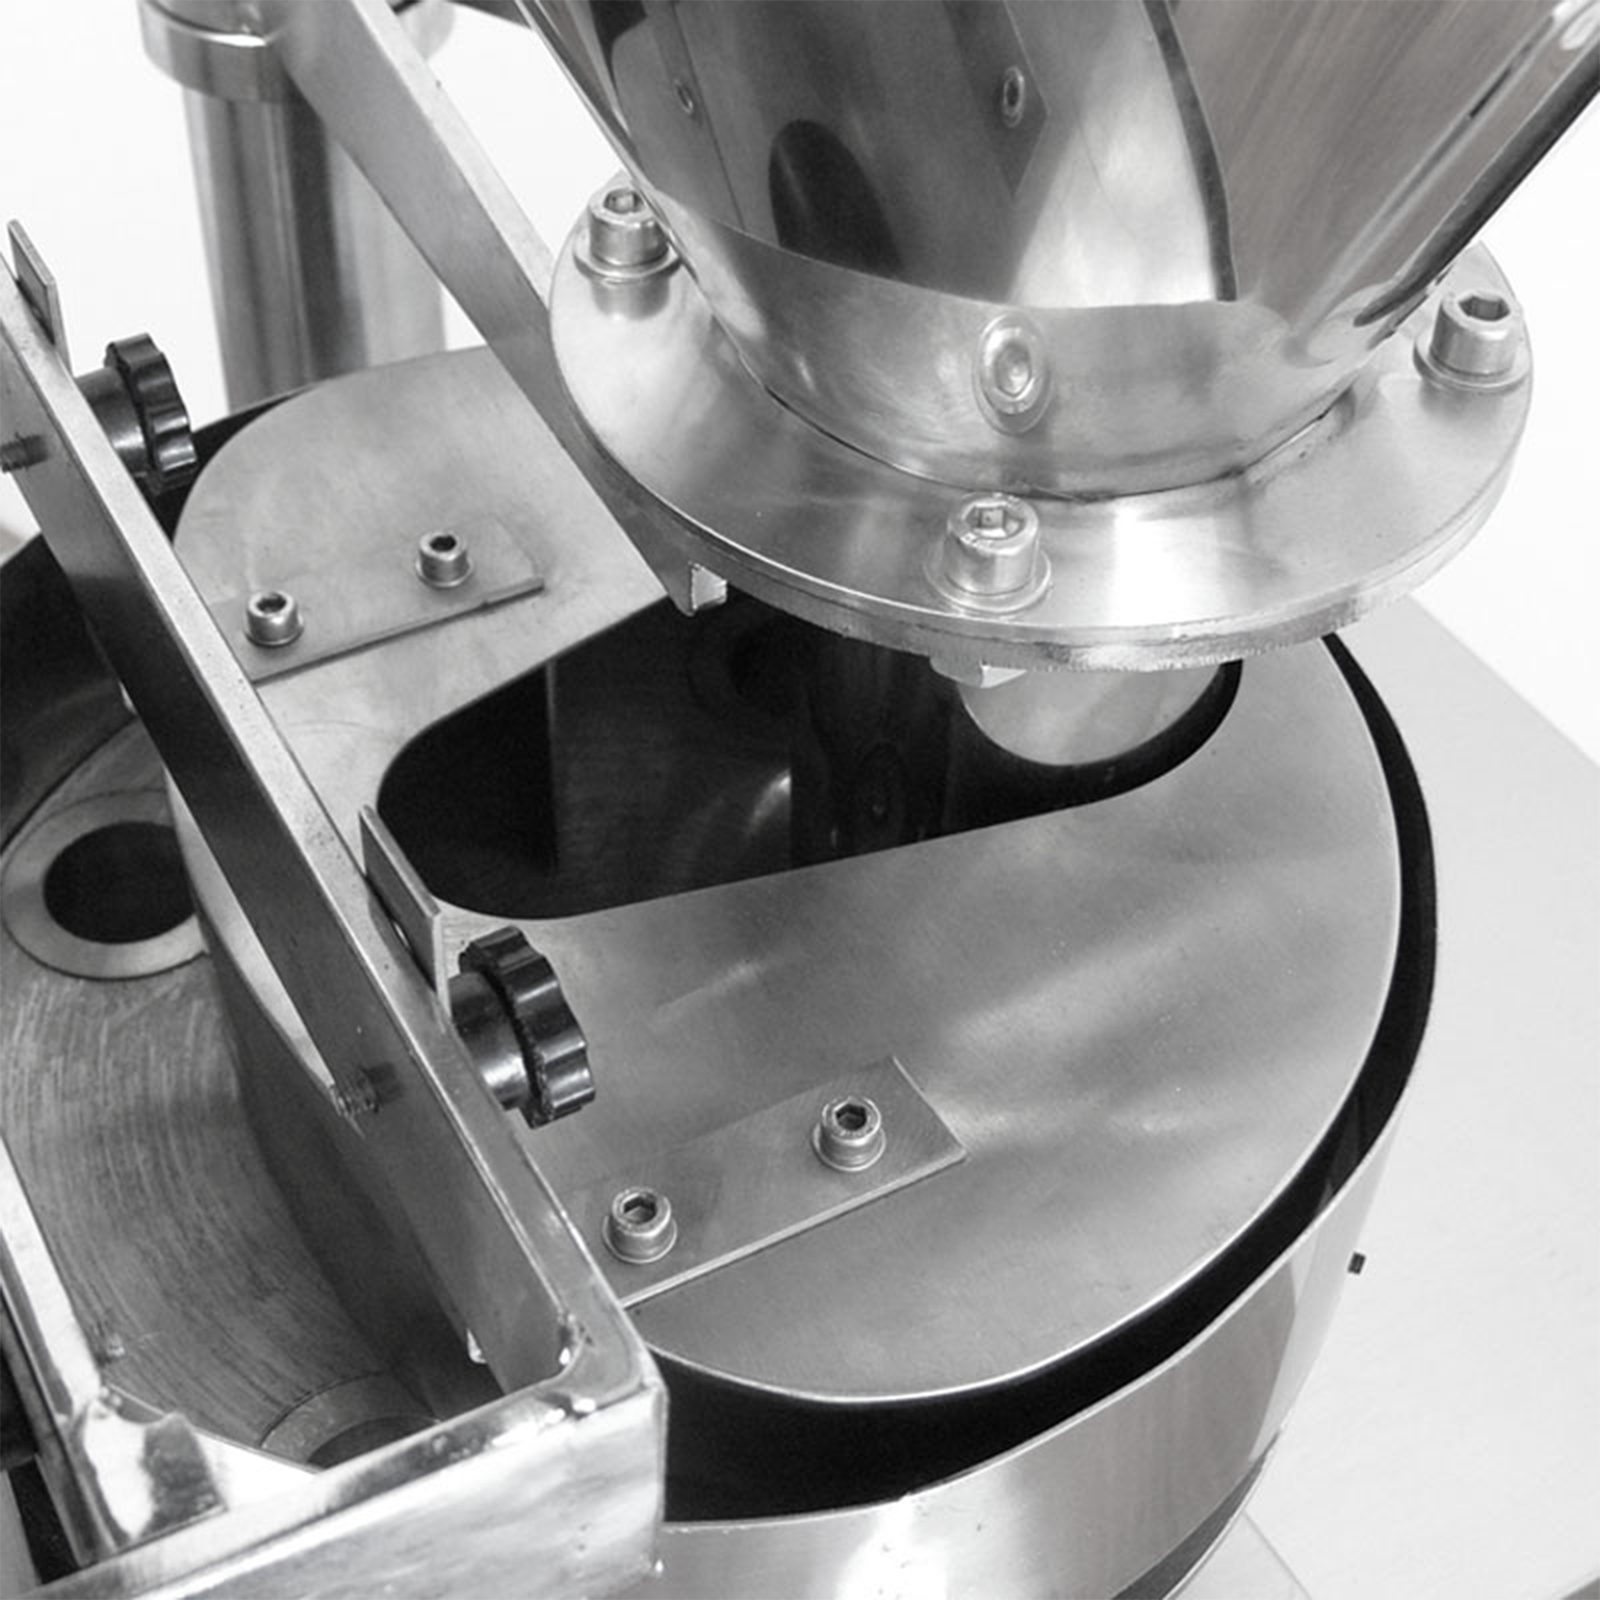 Part of a VFFS vertical form fill and seal packaging system, where the stainless steel feeding hopper can be appreciated along with the rotating disc and volumetric measuring cups. 